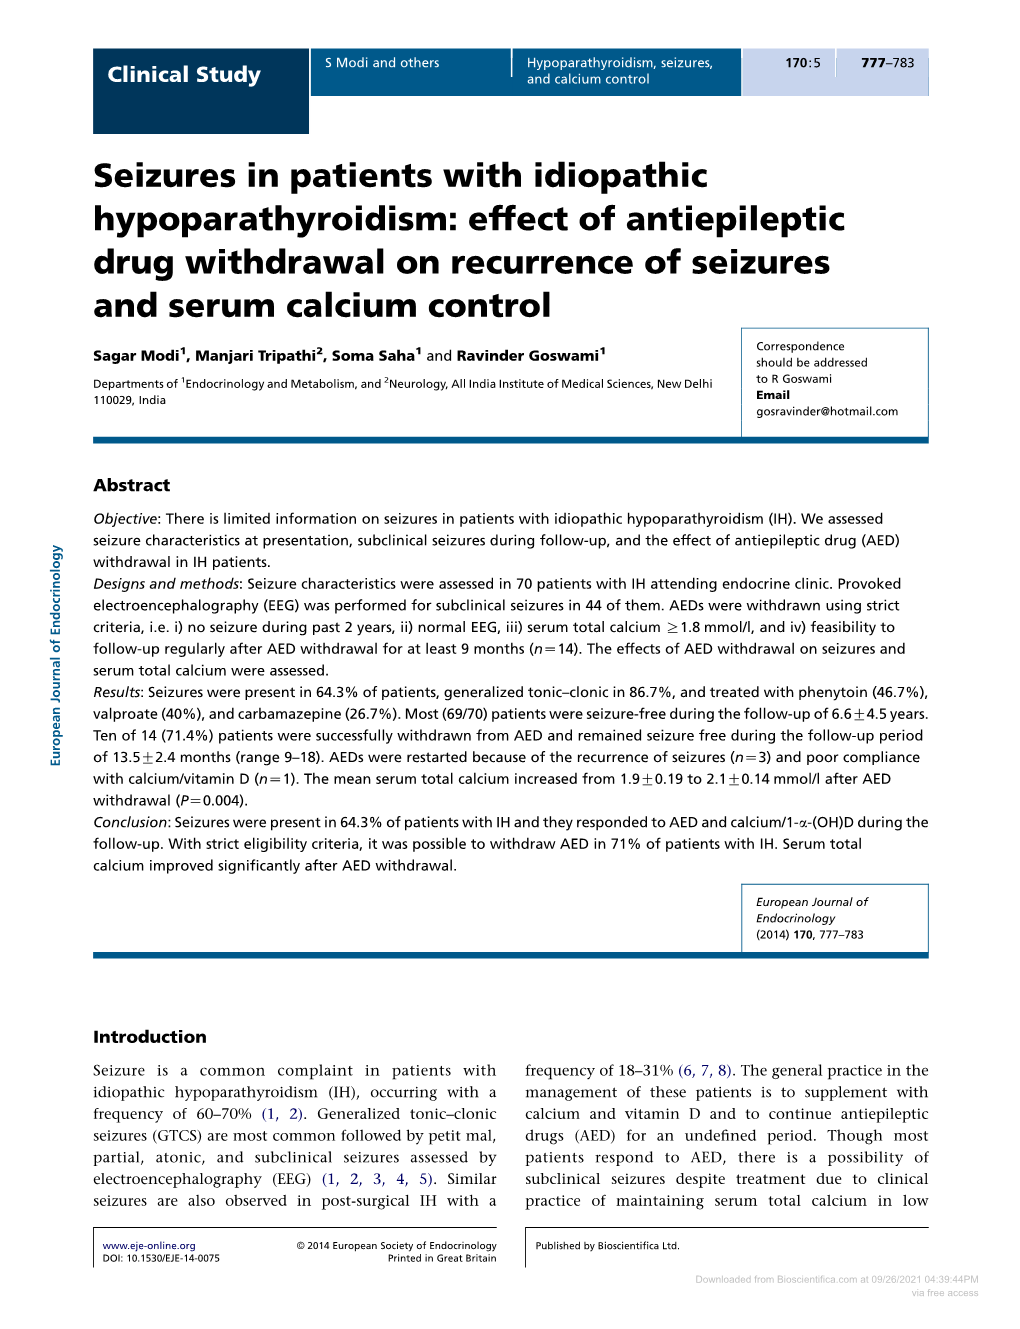 Seizures in Patients with Idiopathic Hypoparathyroidism: Effect of Antiepileptic Drug Withdrawal on Recurrence of Seizures and Serum Calcium Control